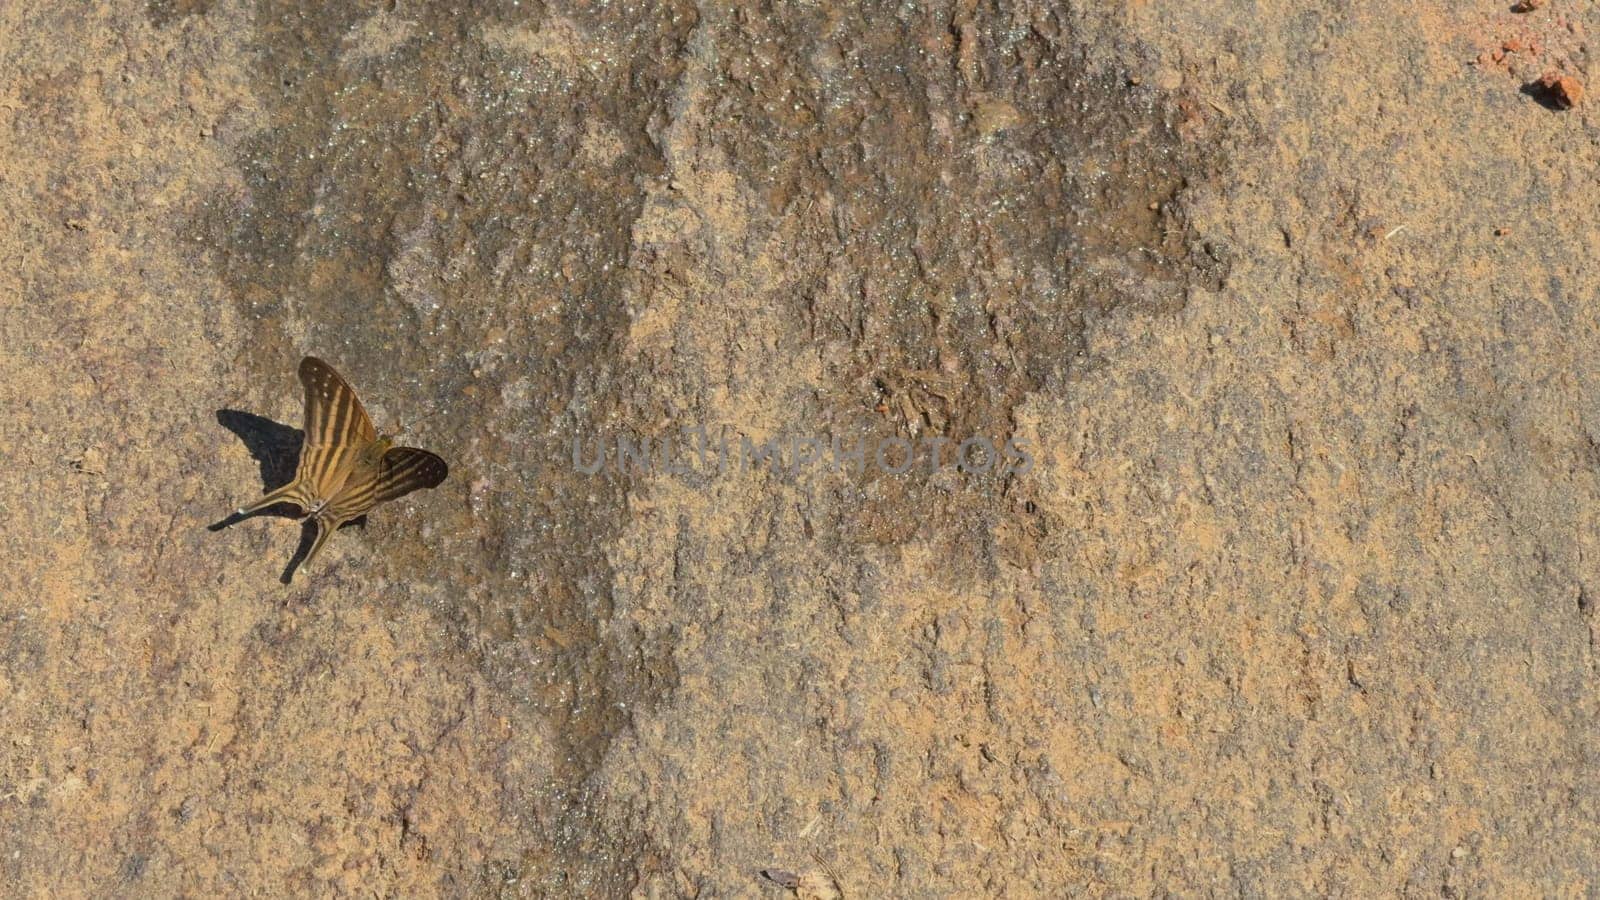 Close-up of a Butterfly Walking on a Sunlit Rock Outdoors by FerradalFCG